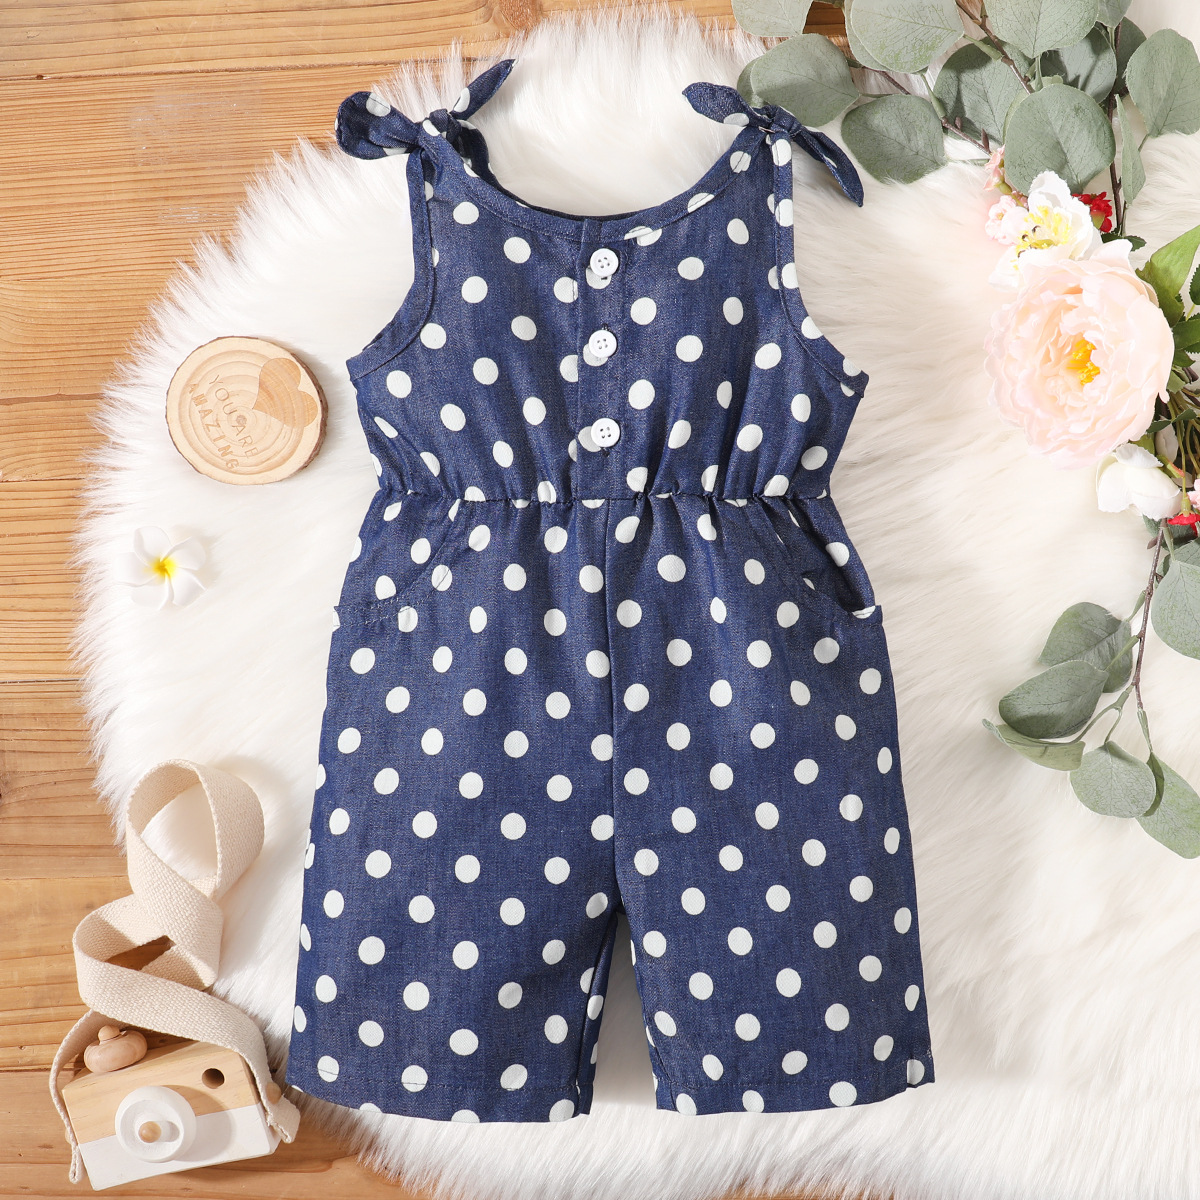 Girls' jumpsuit 2021 new foreign trade E...